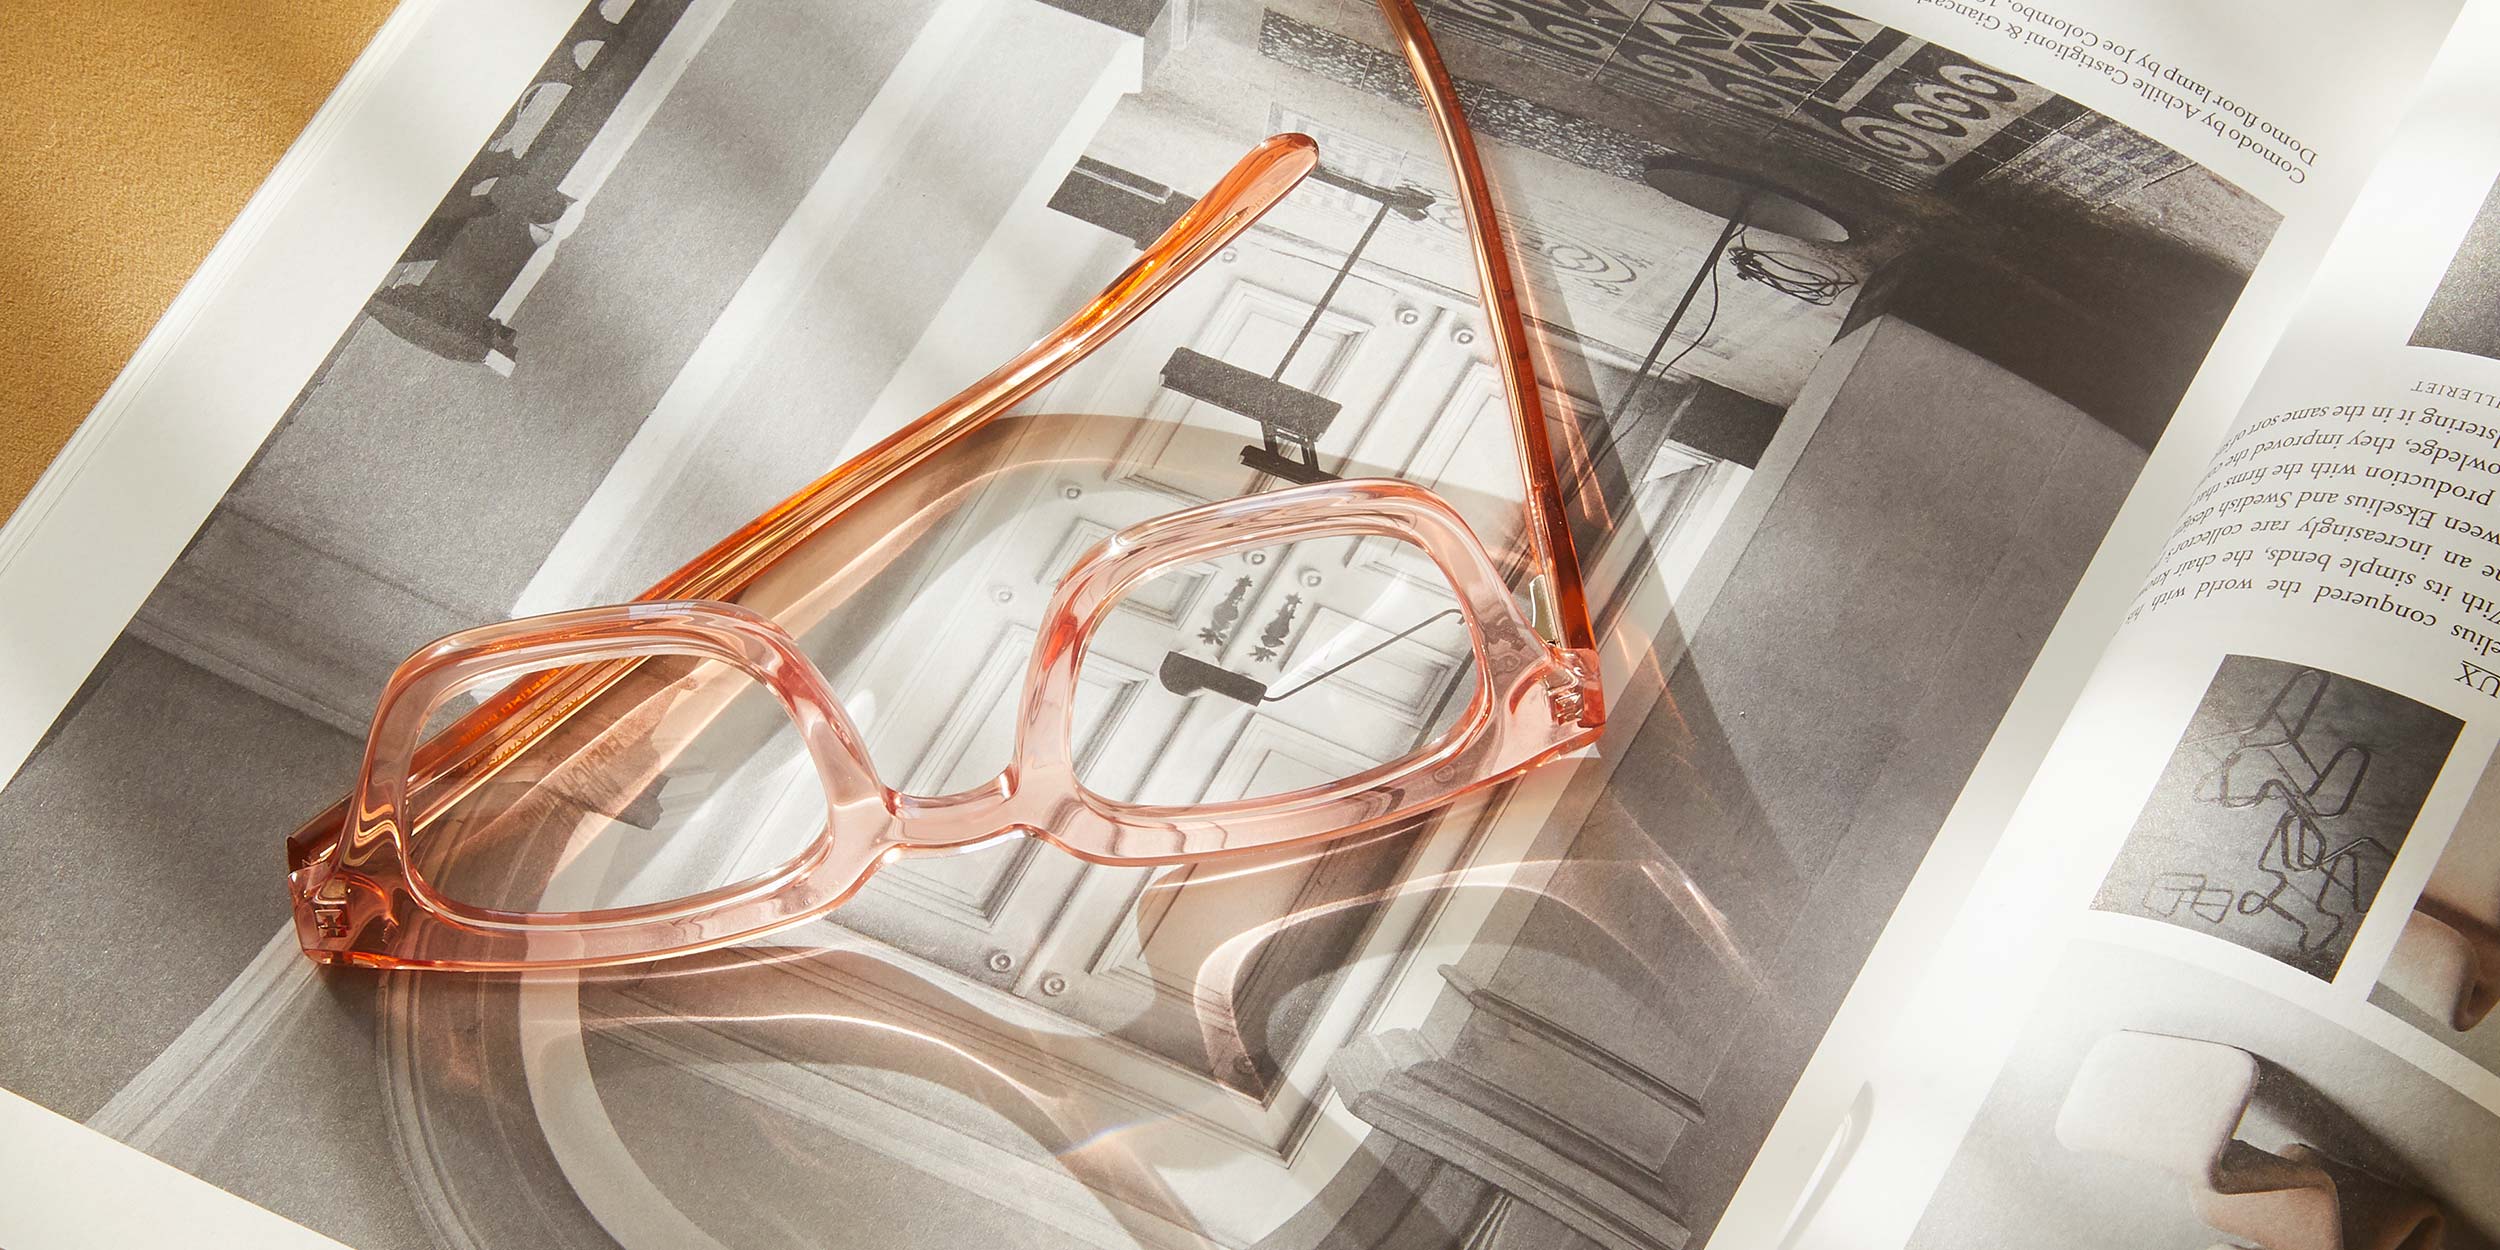 Photo Details of Ysée Black Reading Glasses in a room